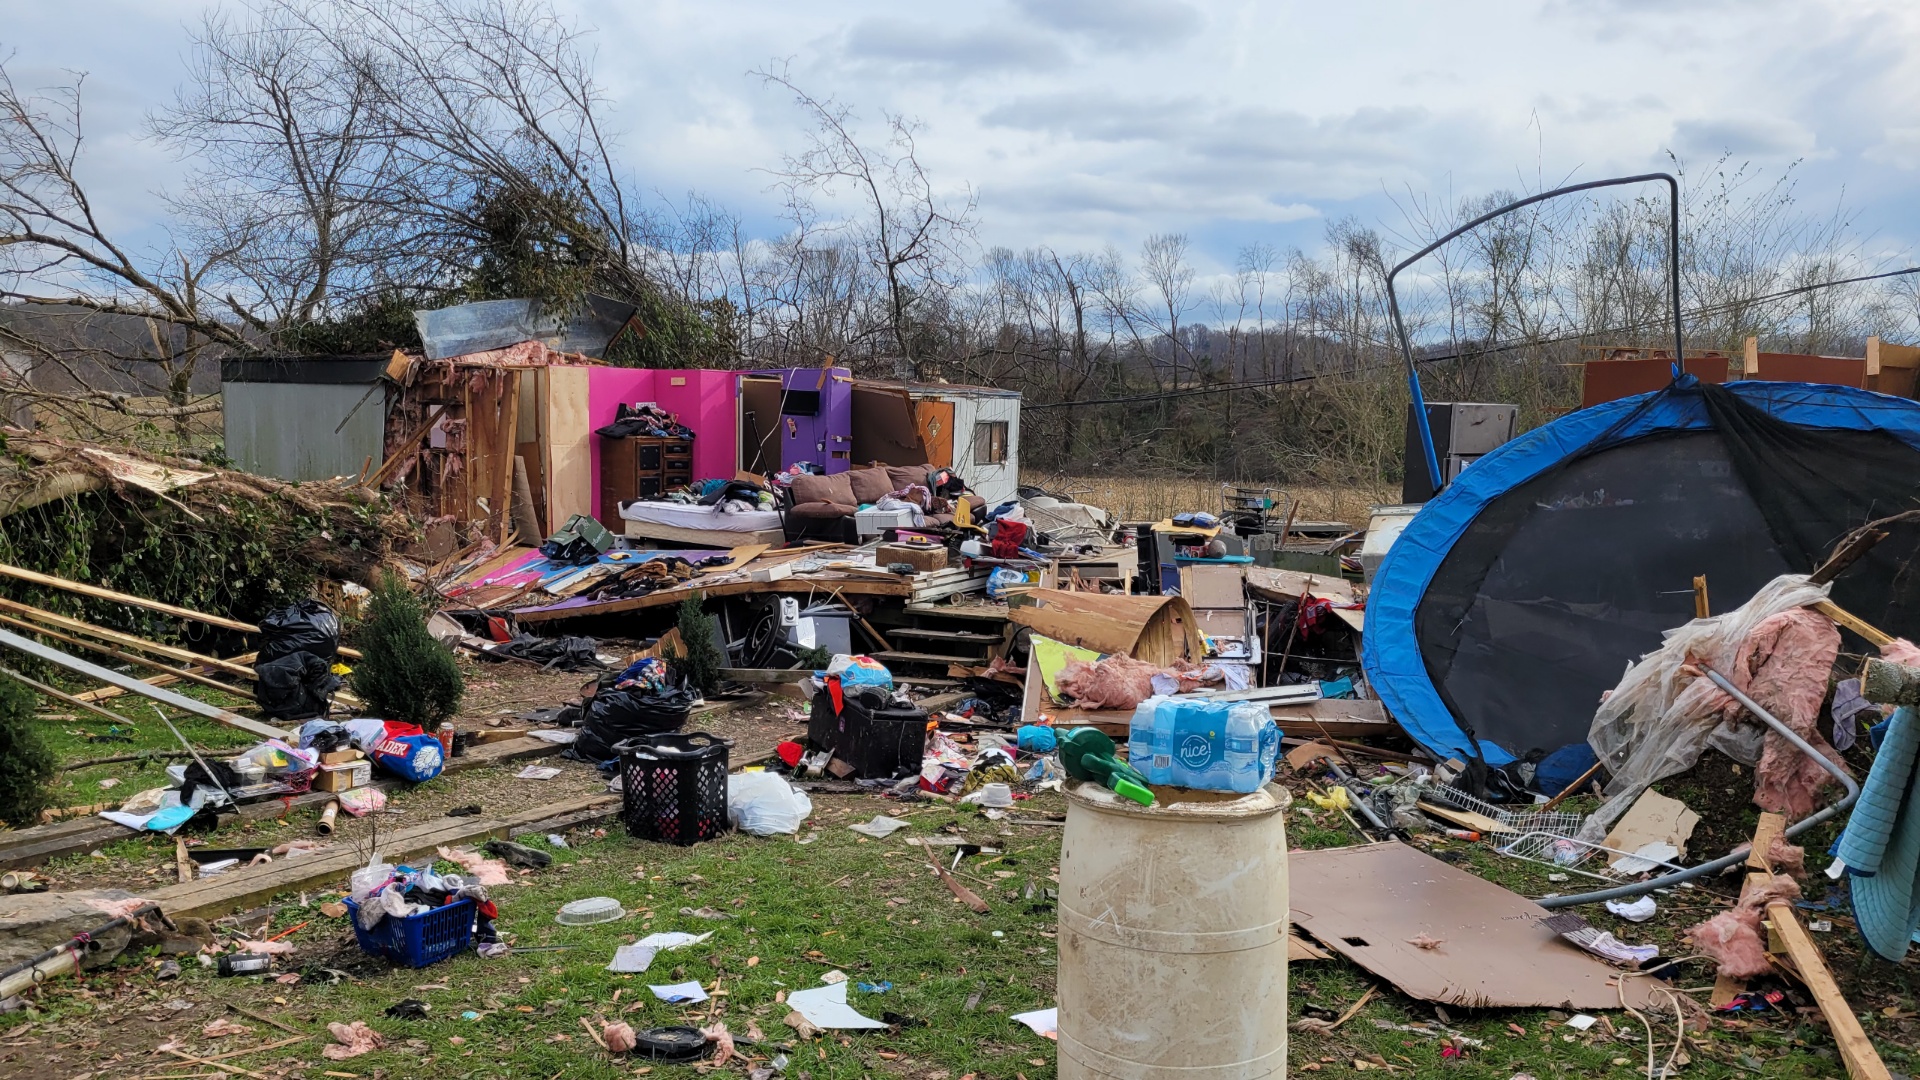 One of the many homes destroyed Dec. 10, 2021 in the tornado outbreak in the south and Midwest. Red Cross Photo.